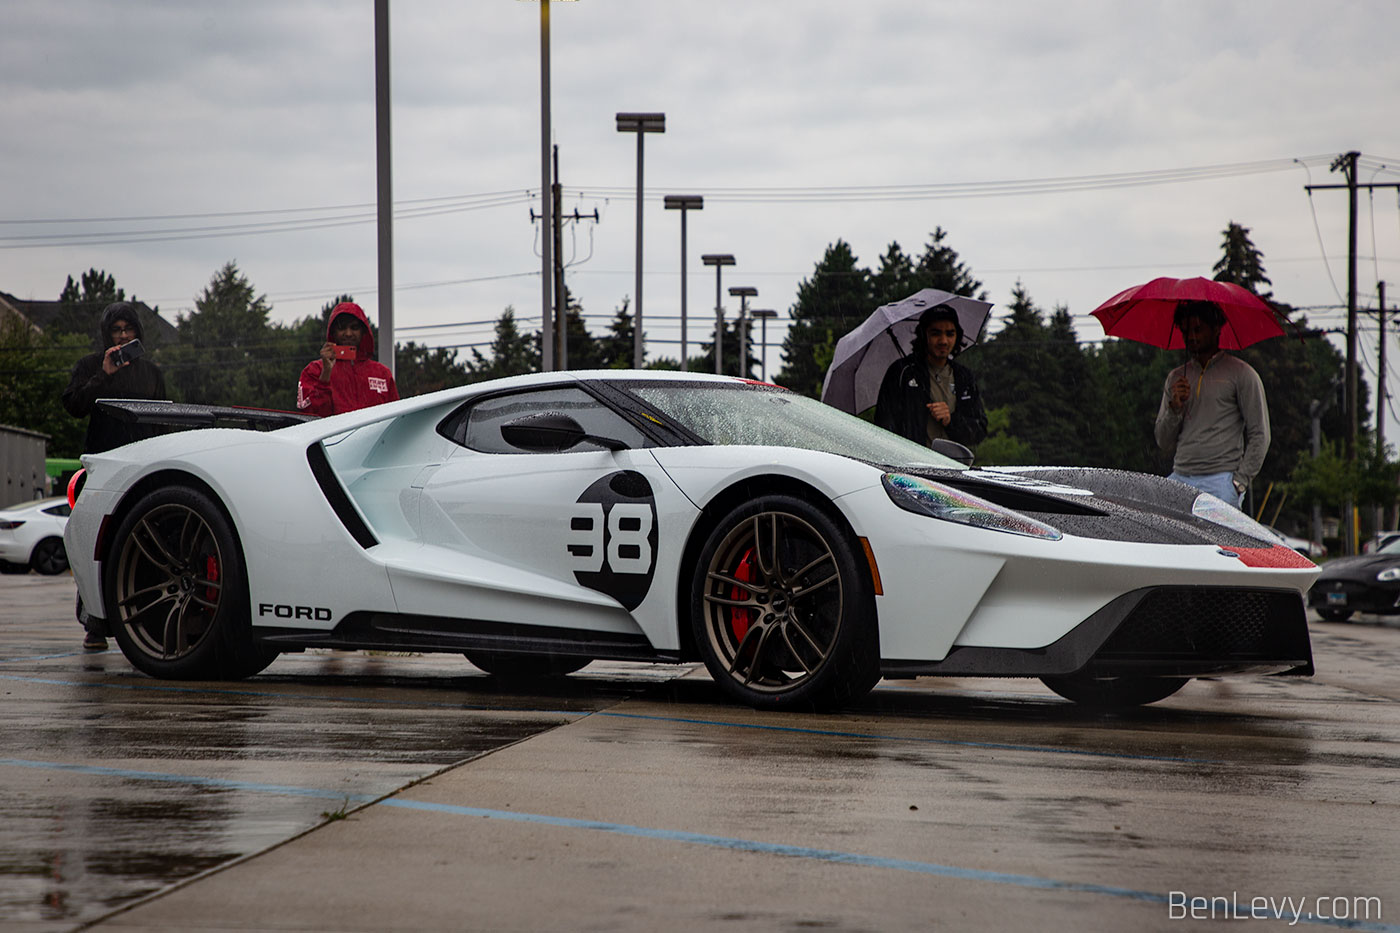 White Ford GT with number "98" on the door